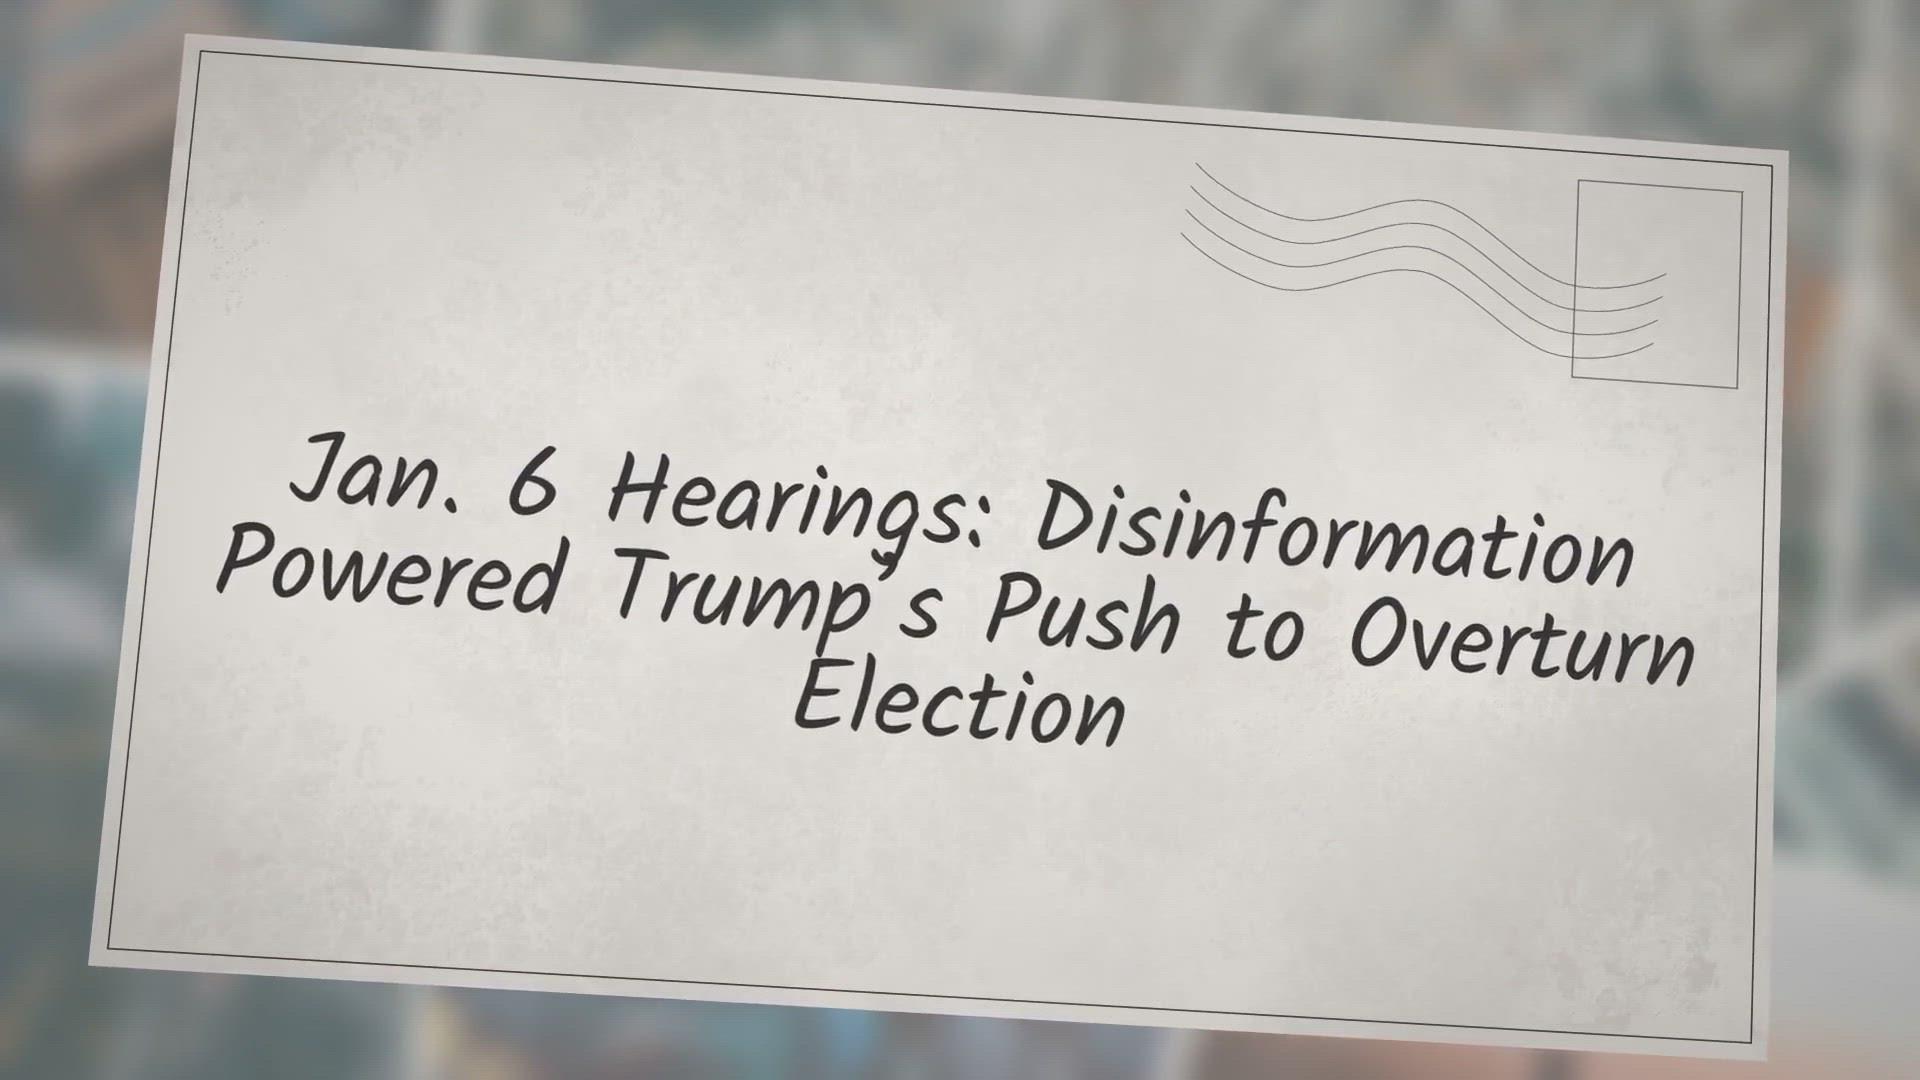 'Video thumbnail for Jan. 6 Hearings: Disinformation Powered Trump’s Push to Overturn Election'